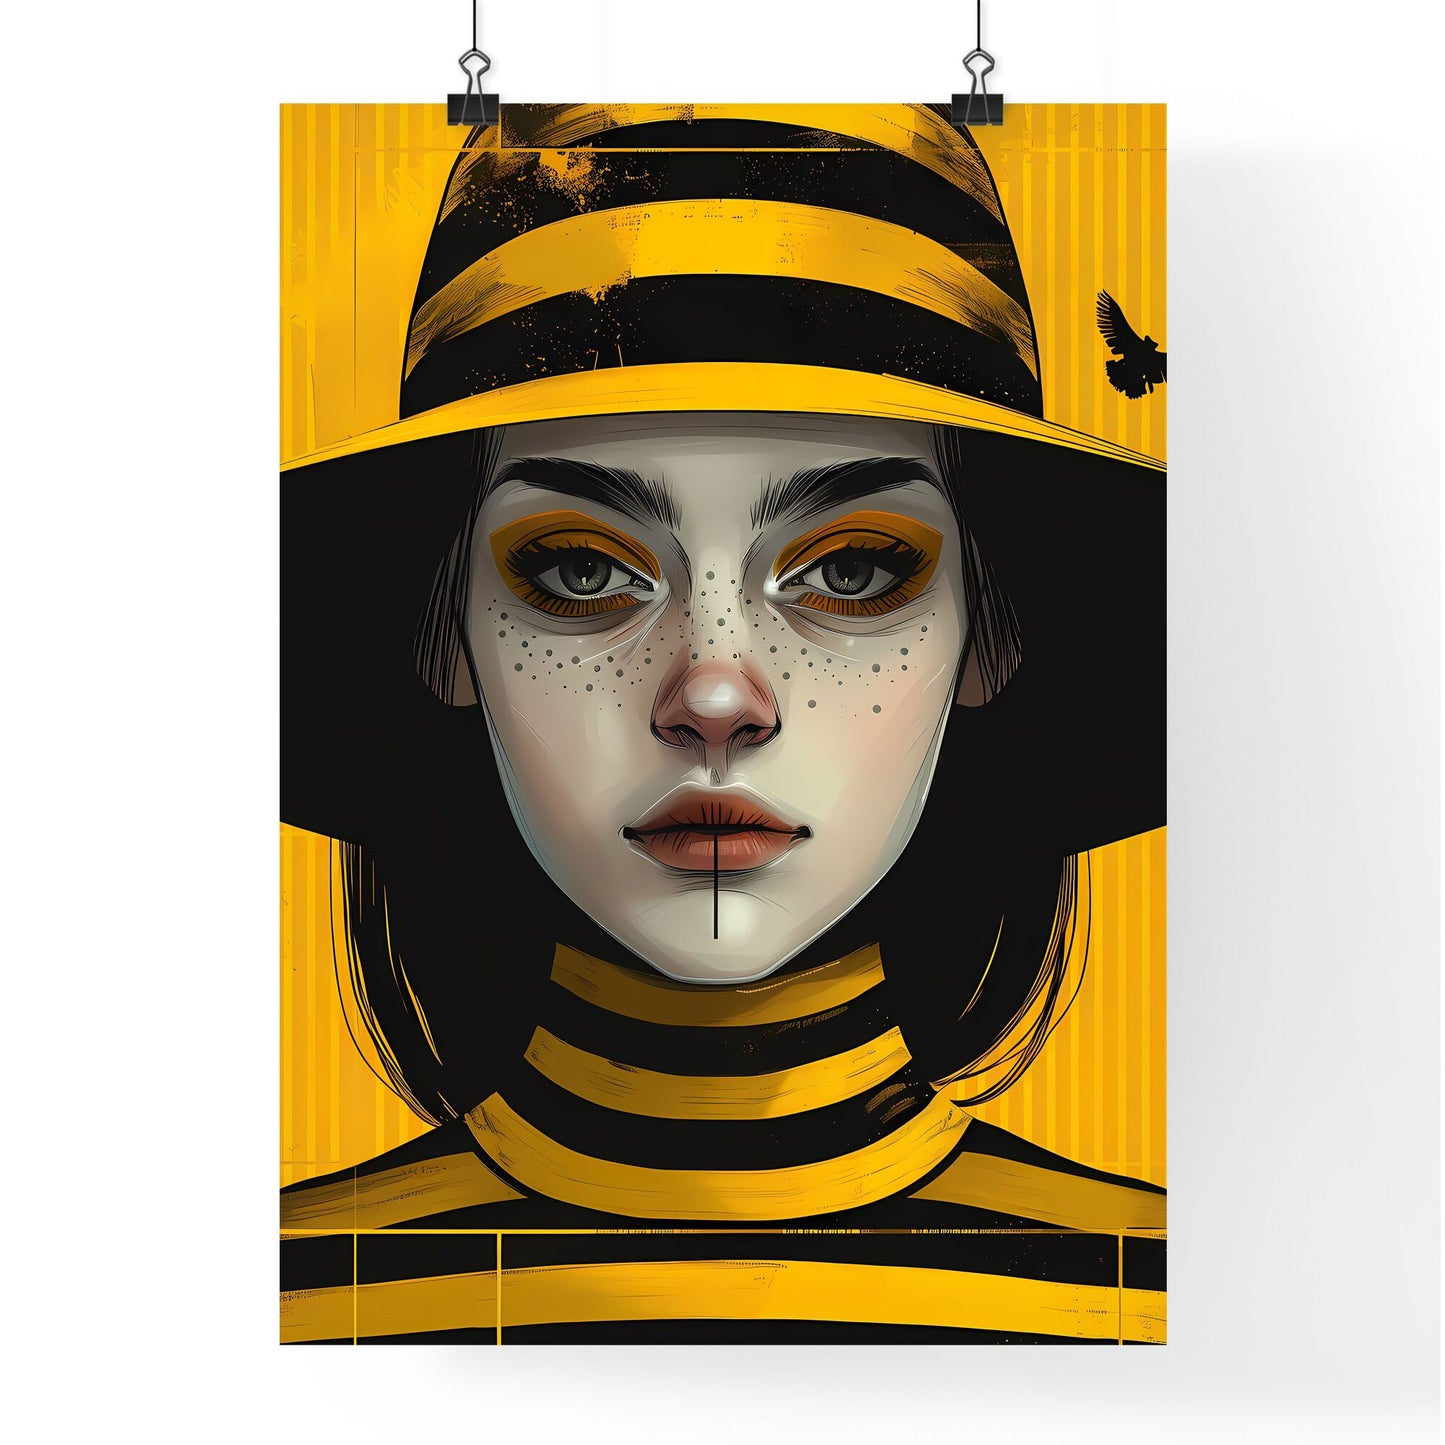 Striking Yellow-and-Black Art Poster Featuring Woman in Hat Default Title